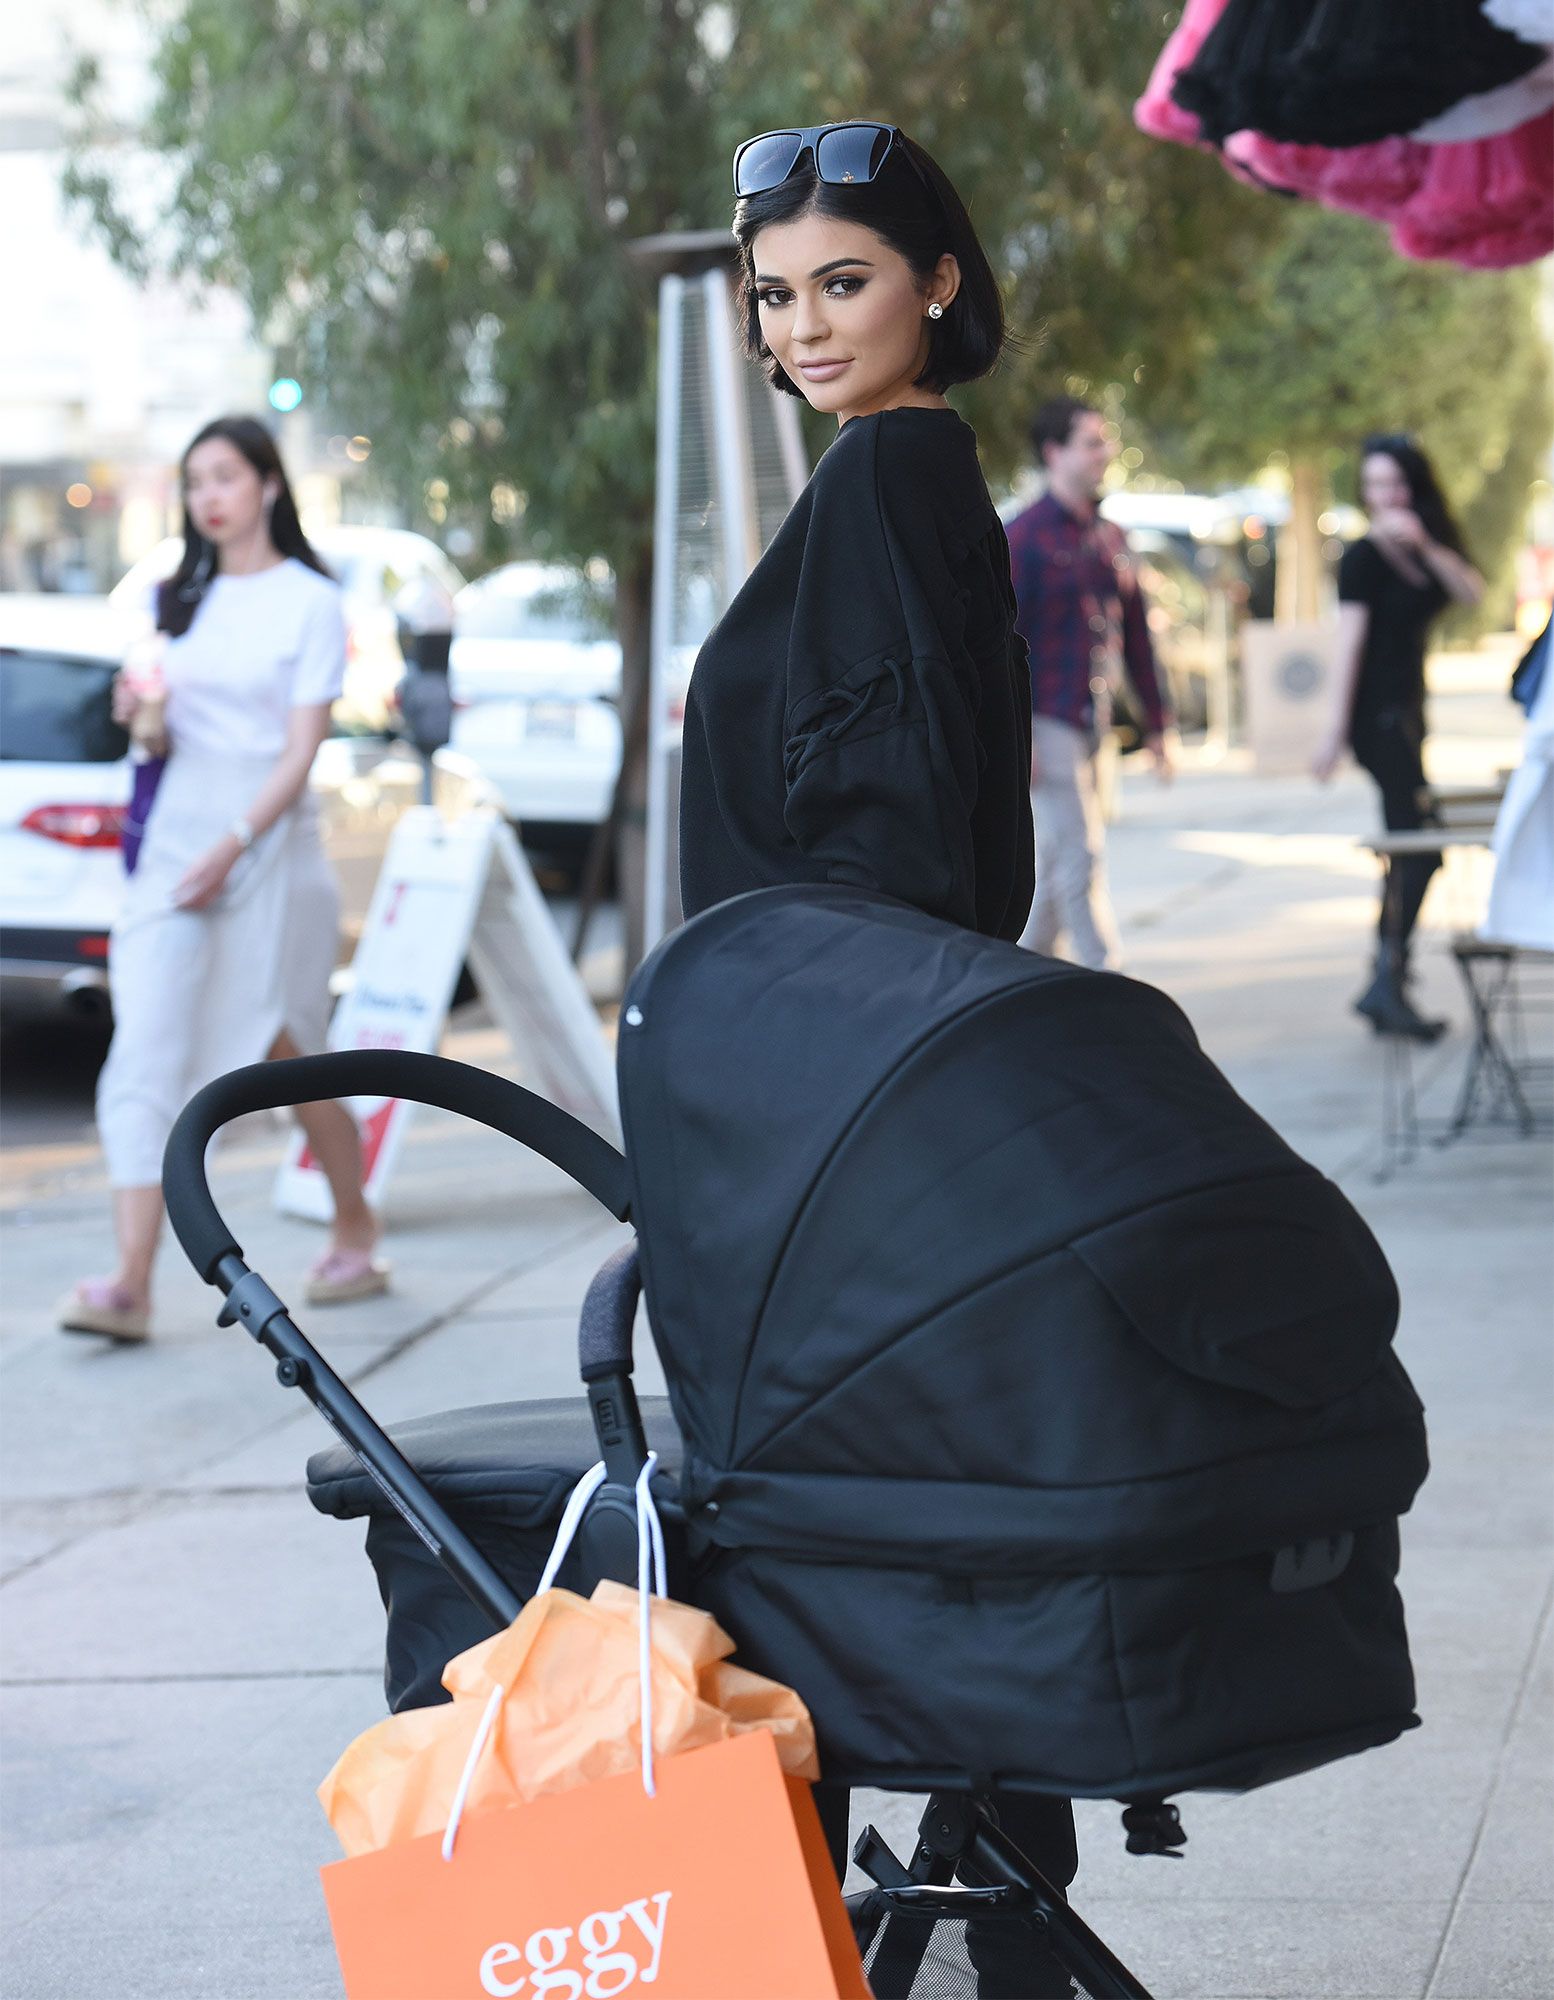 Kylie Jenner says Stormi Webster's first purse will be a $27K Hermès